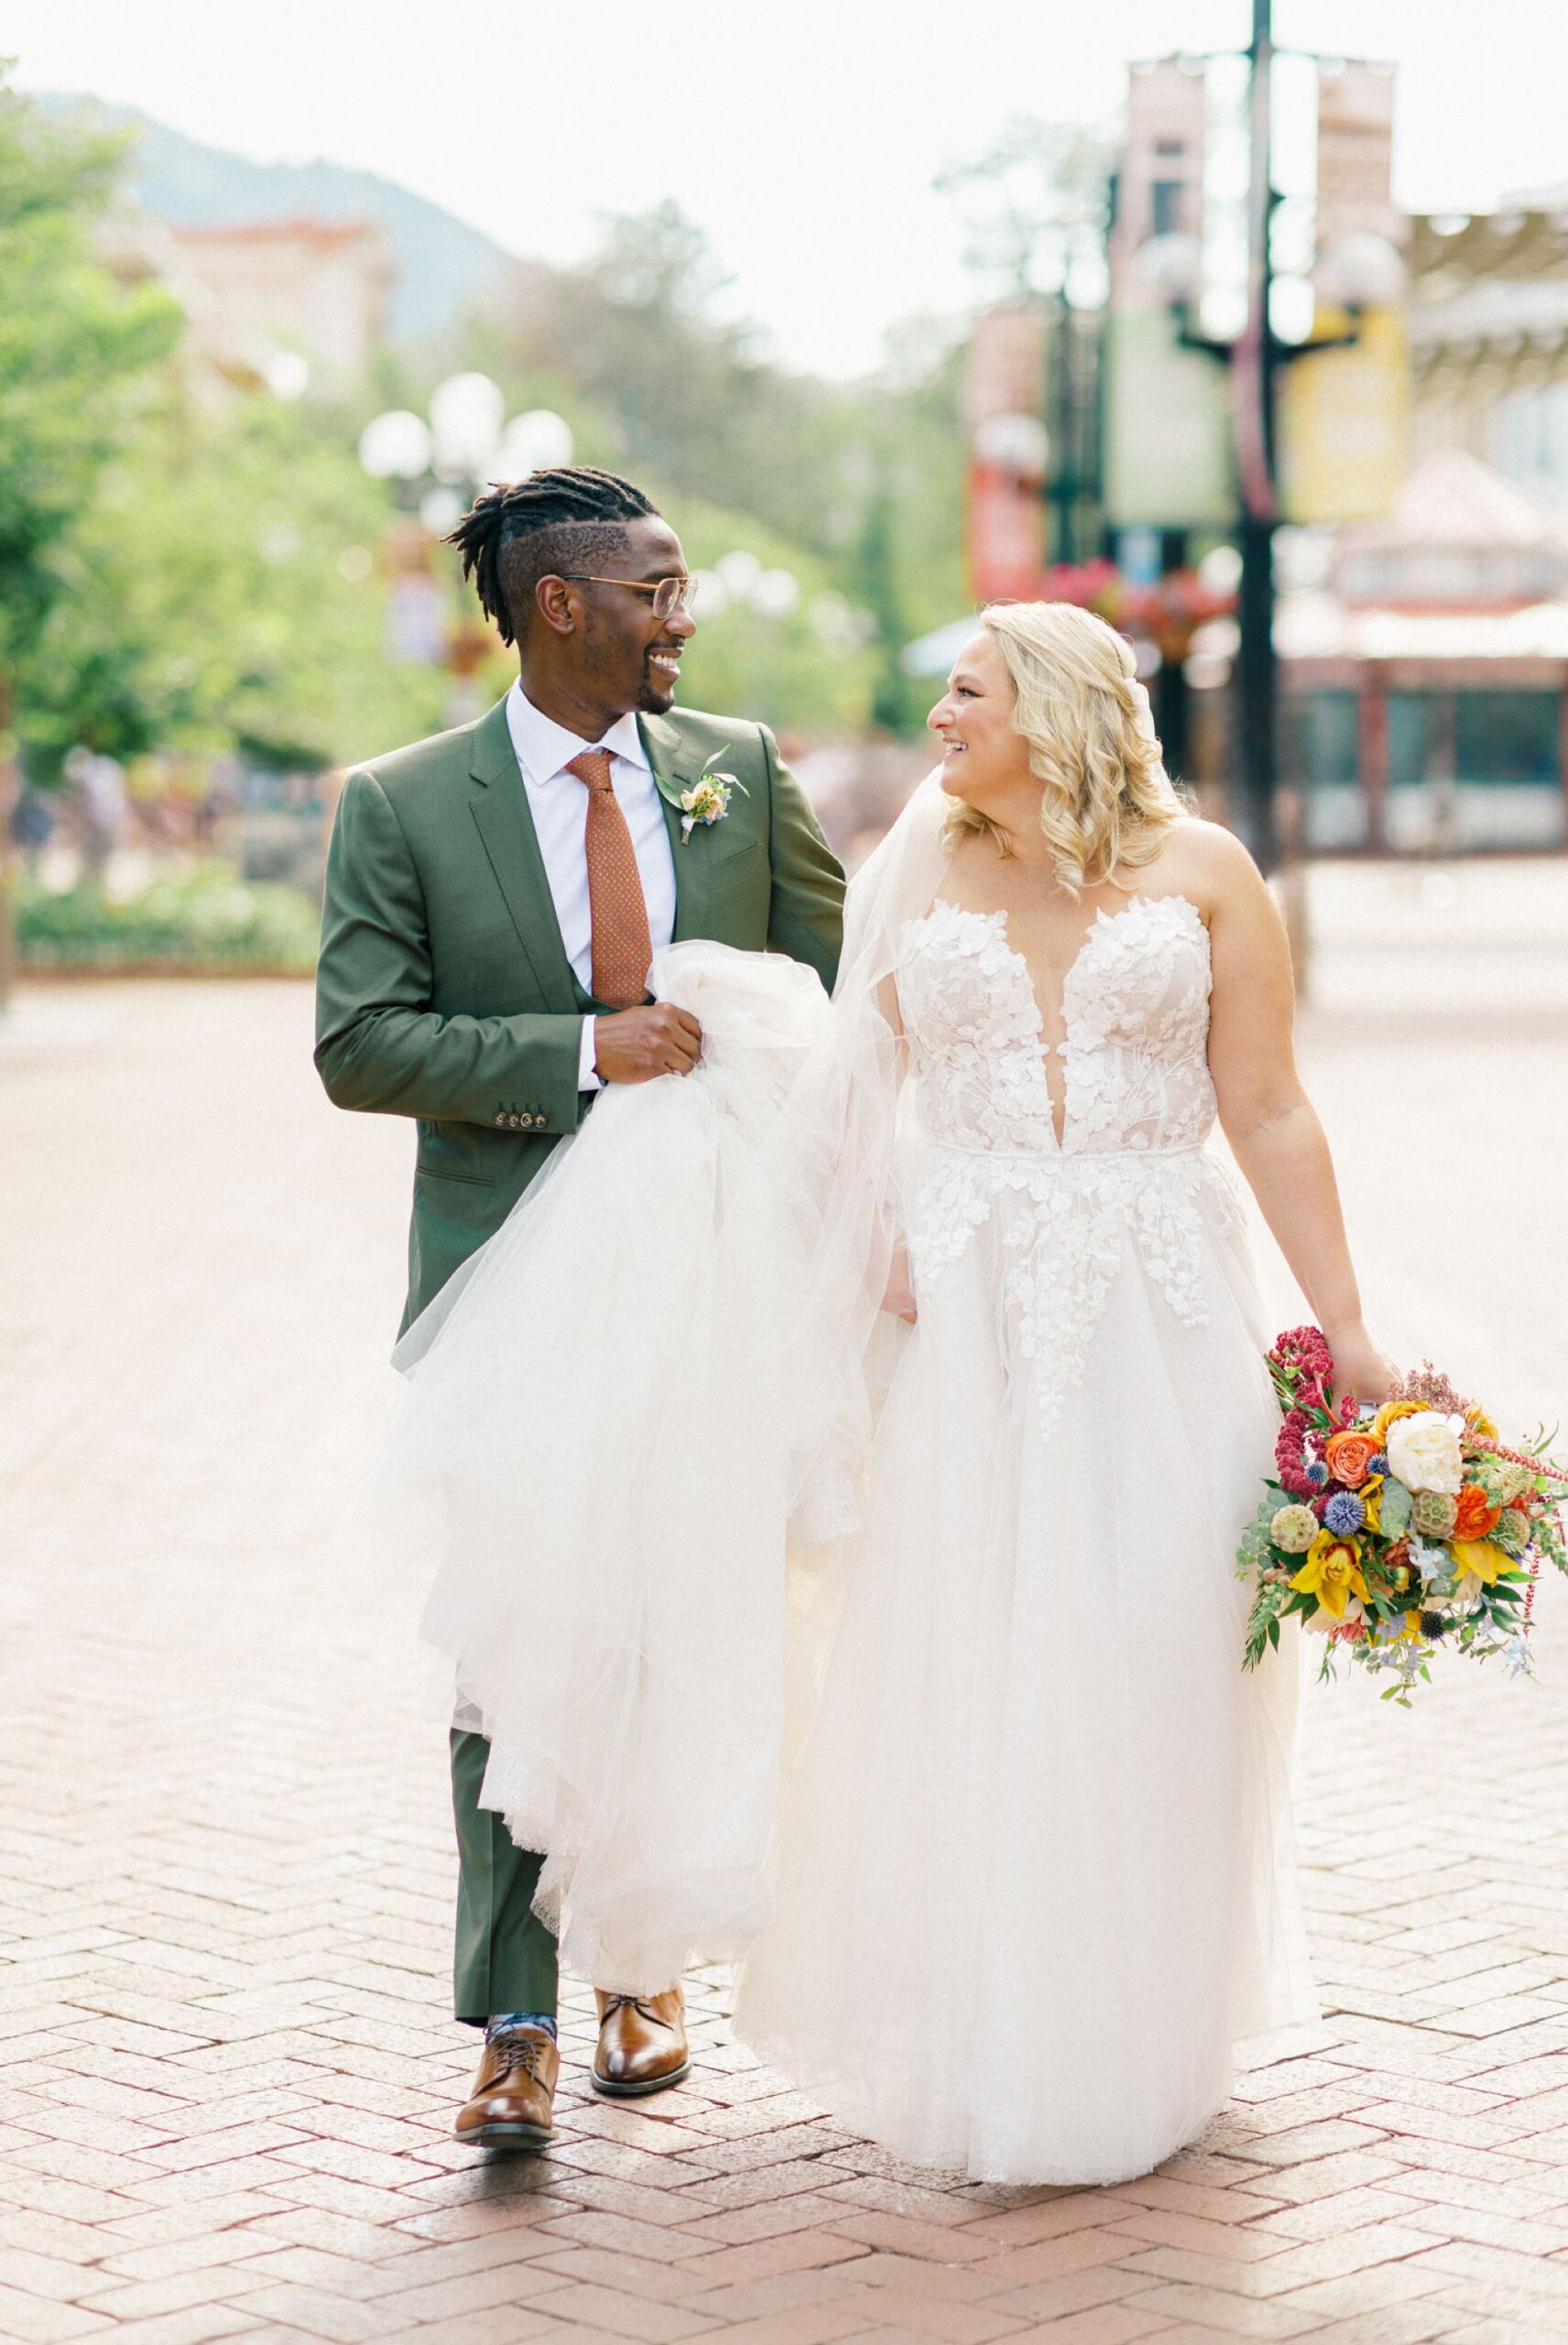 Downtown Boulder wedding captured by Colorado Wedding Photographers Taylor Nicole Photography.